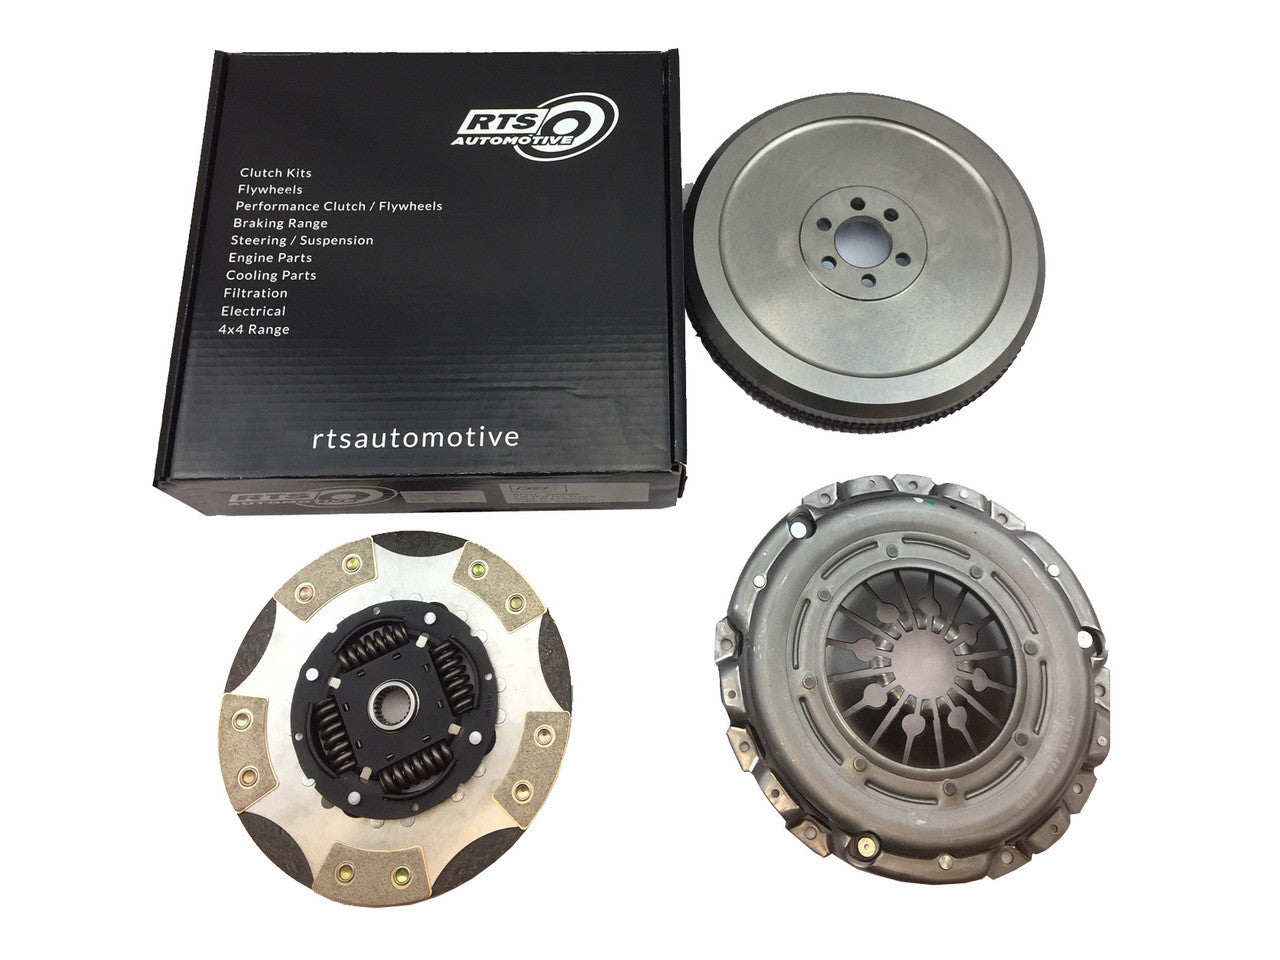 RTS Performance Clutch – SMF & Twin-Friction Clutch Kit for 2.0TFSI EA113